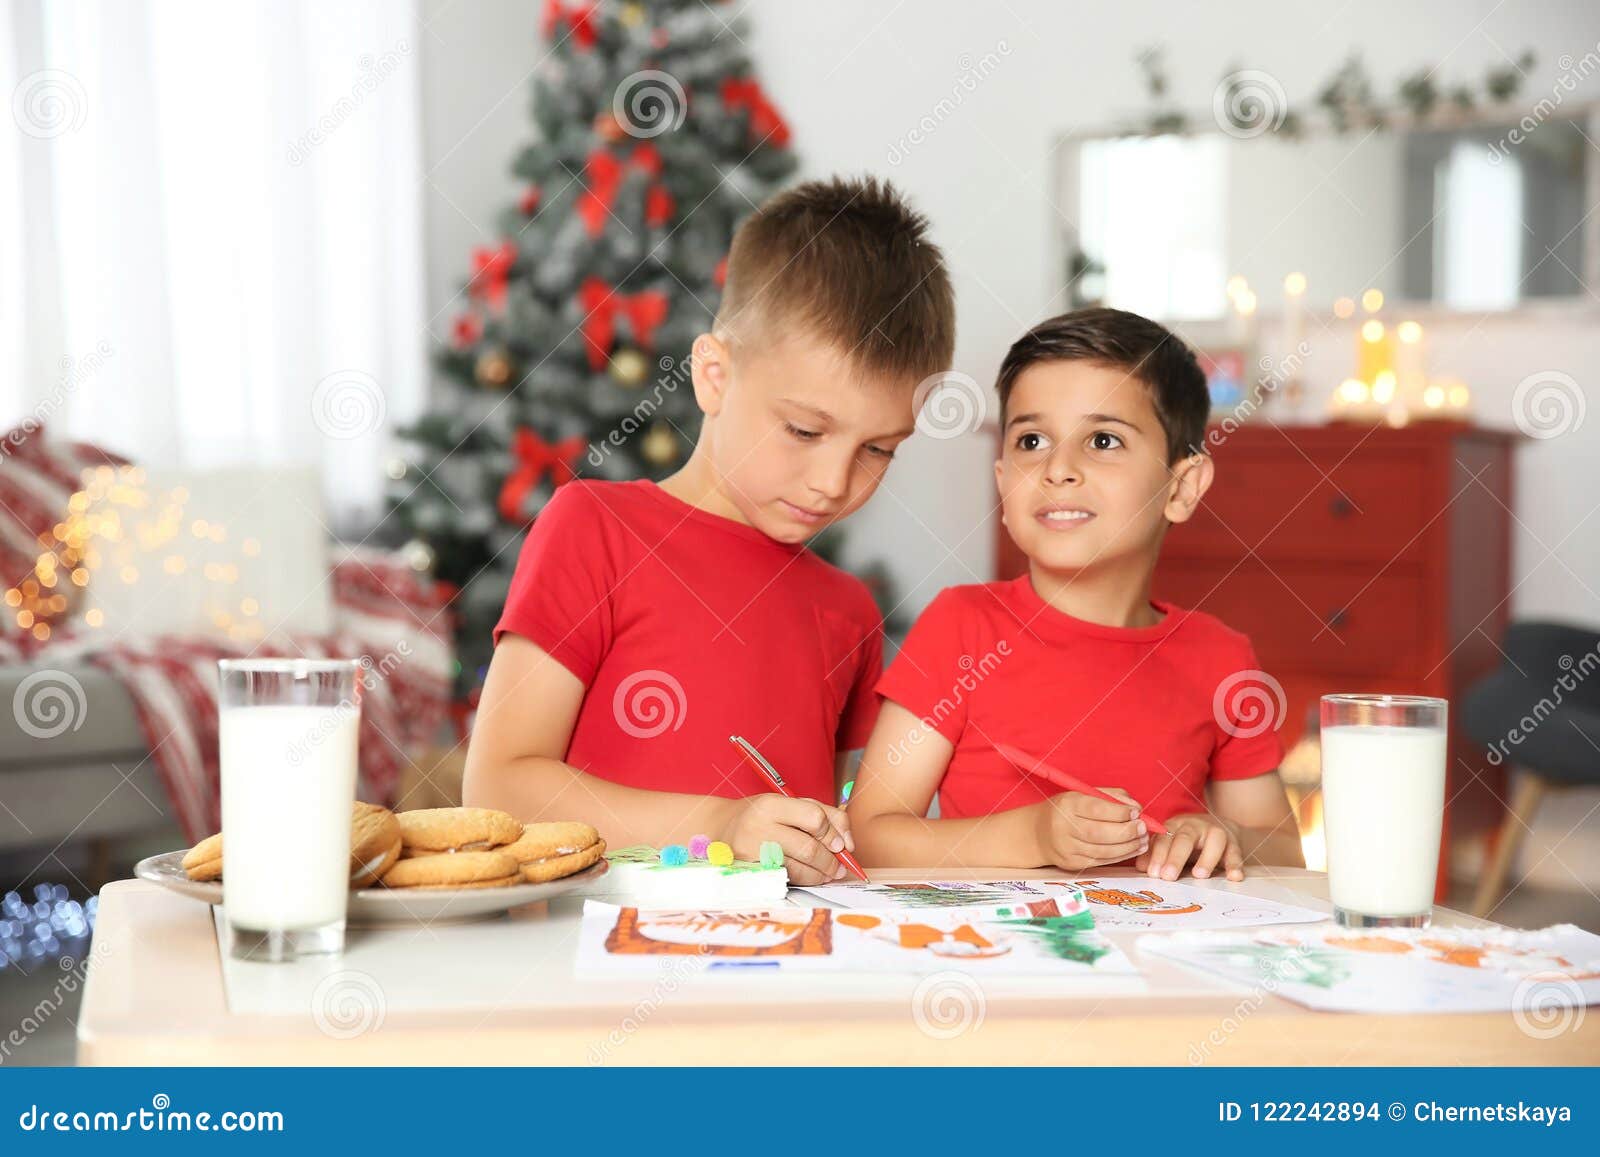 Little children drawing picture at home Christmas celebration